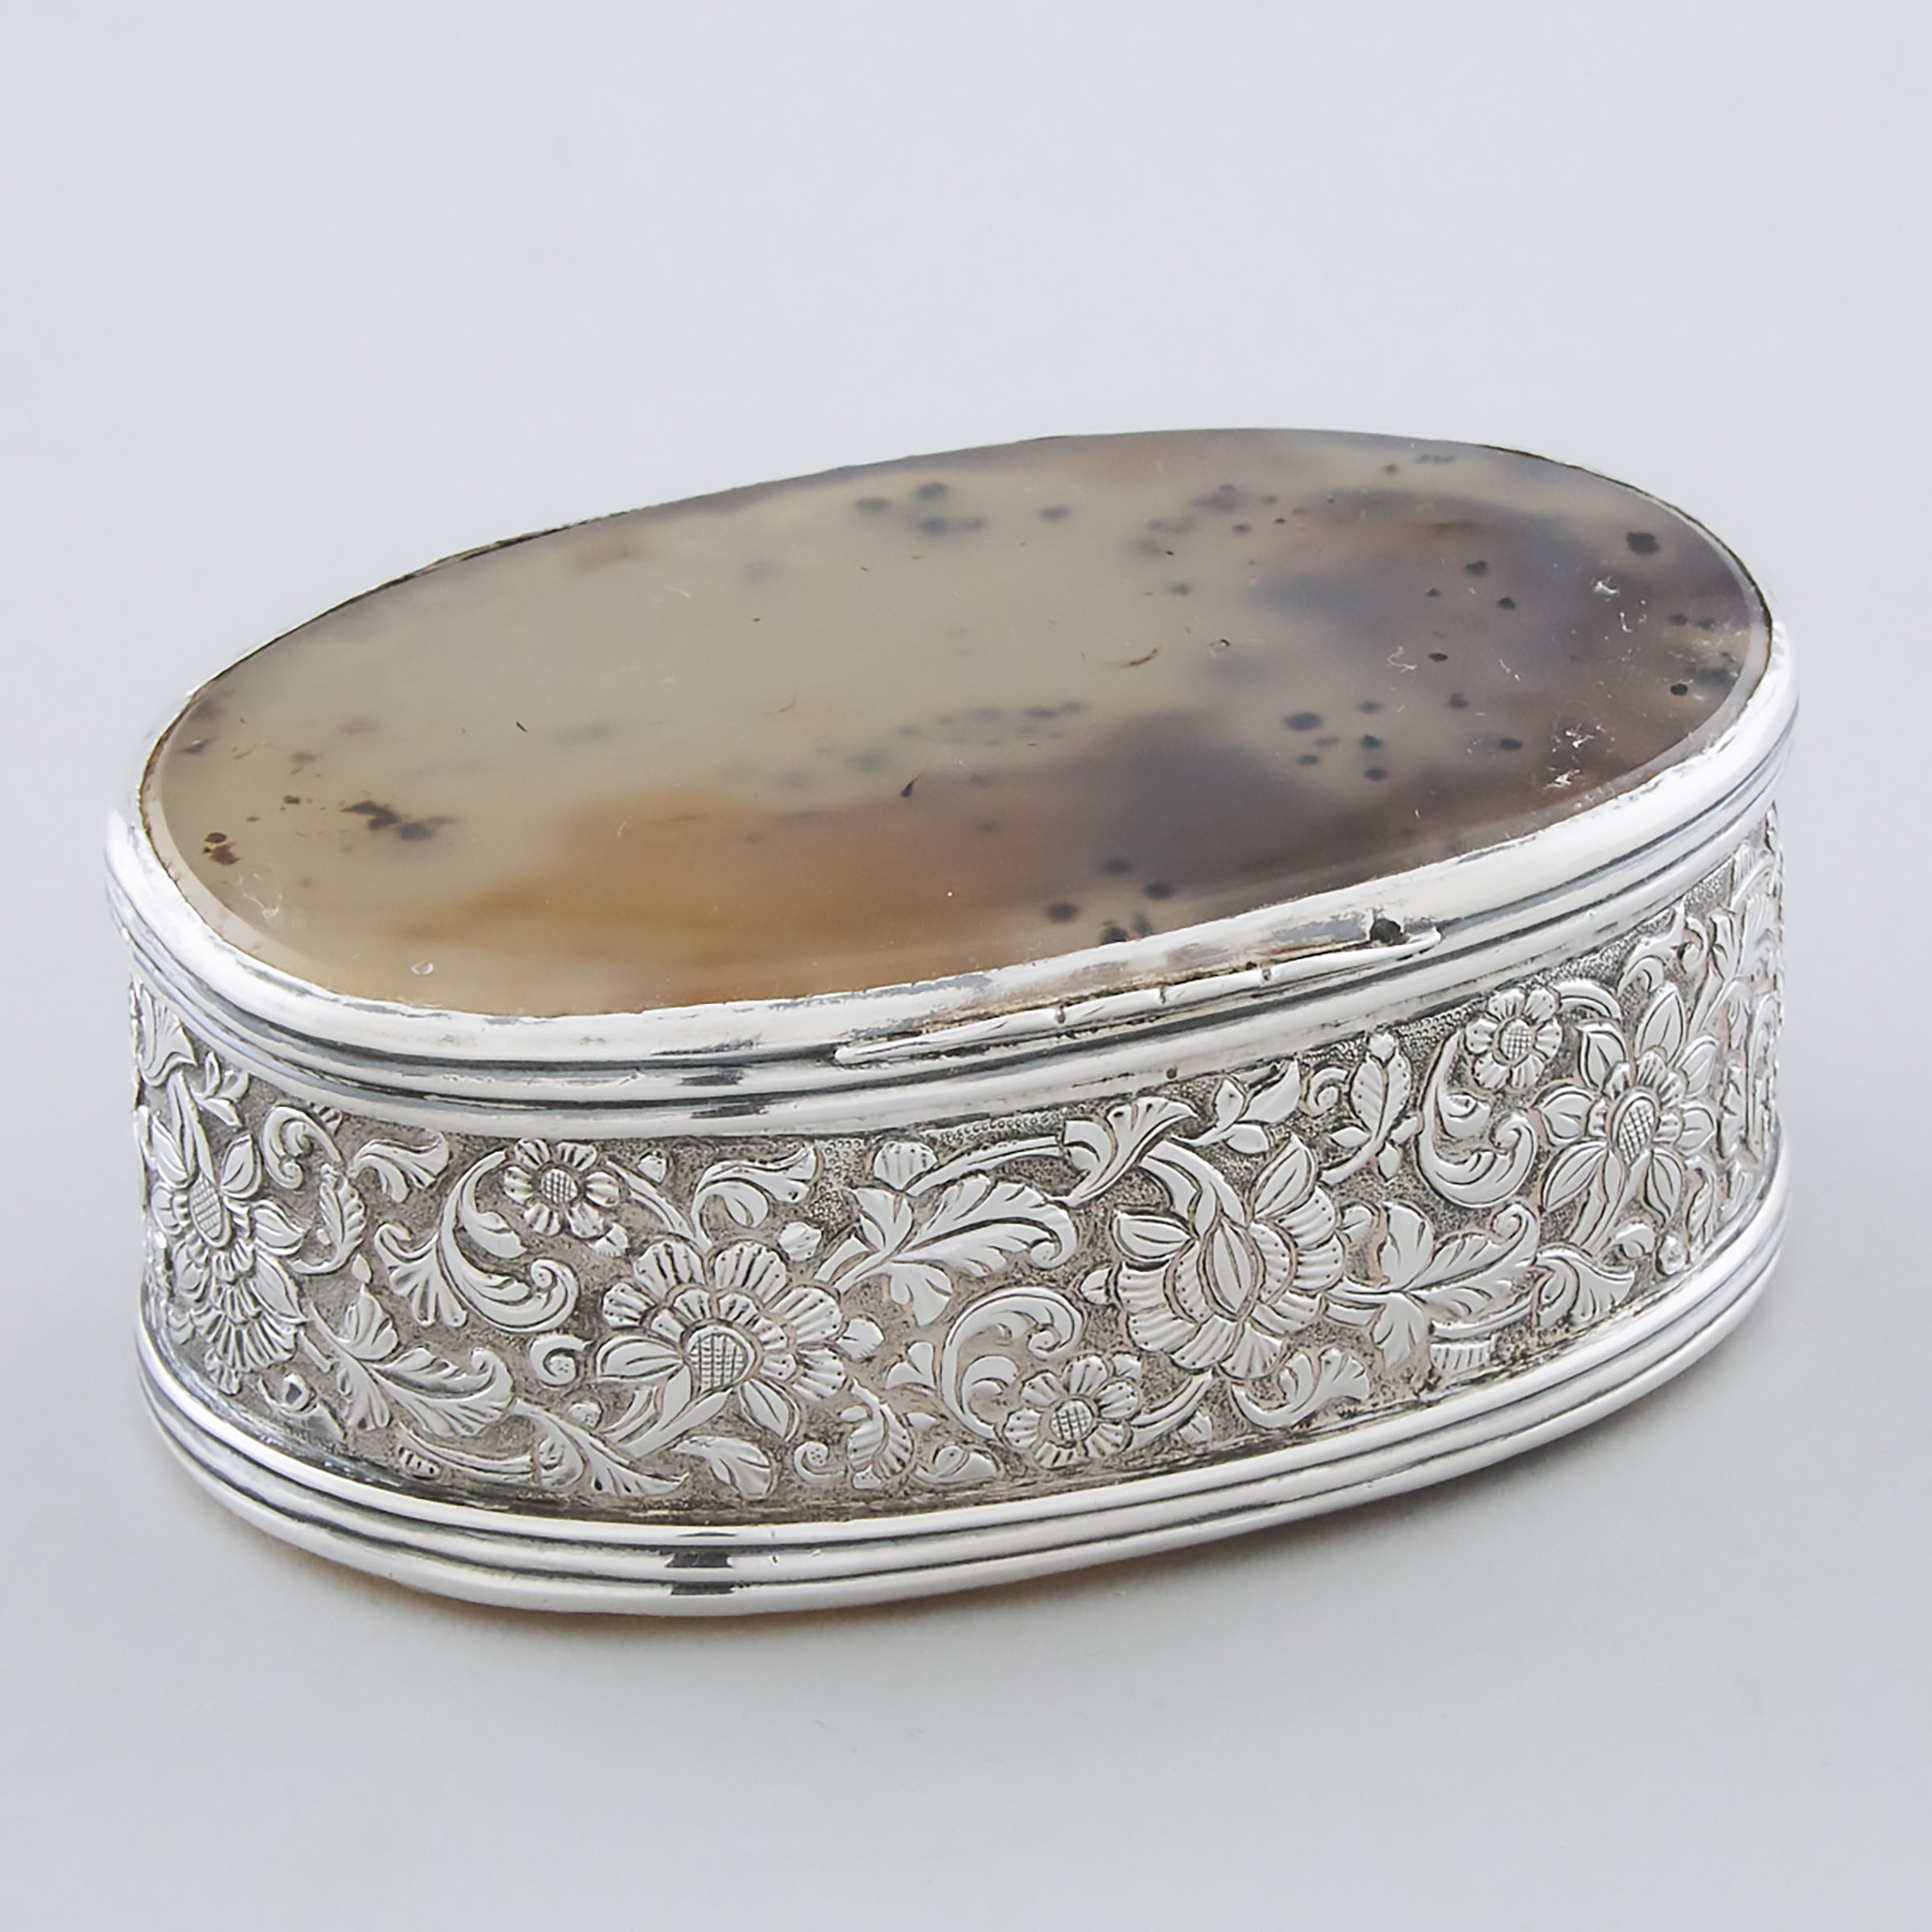 Eastern Silver and Agate Oval Box, probably Indian, 19th century